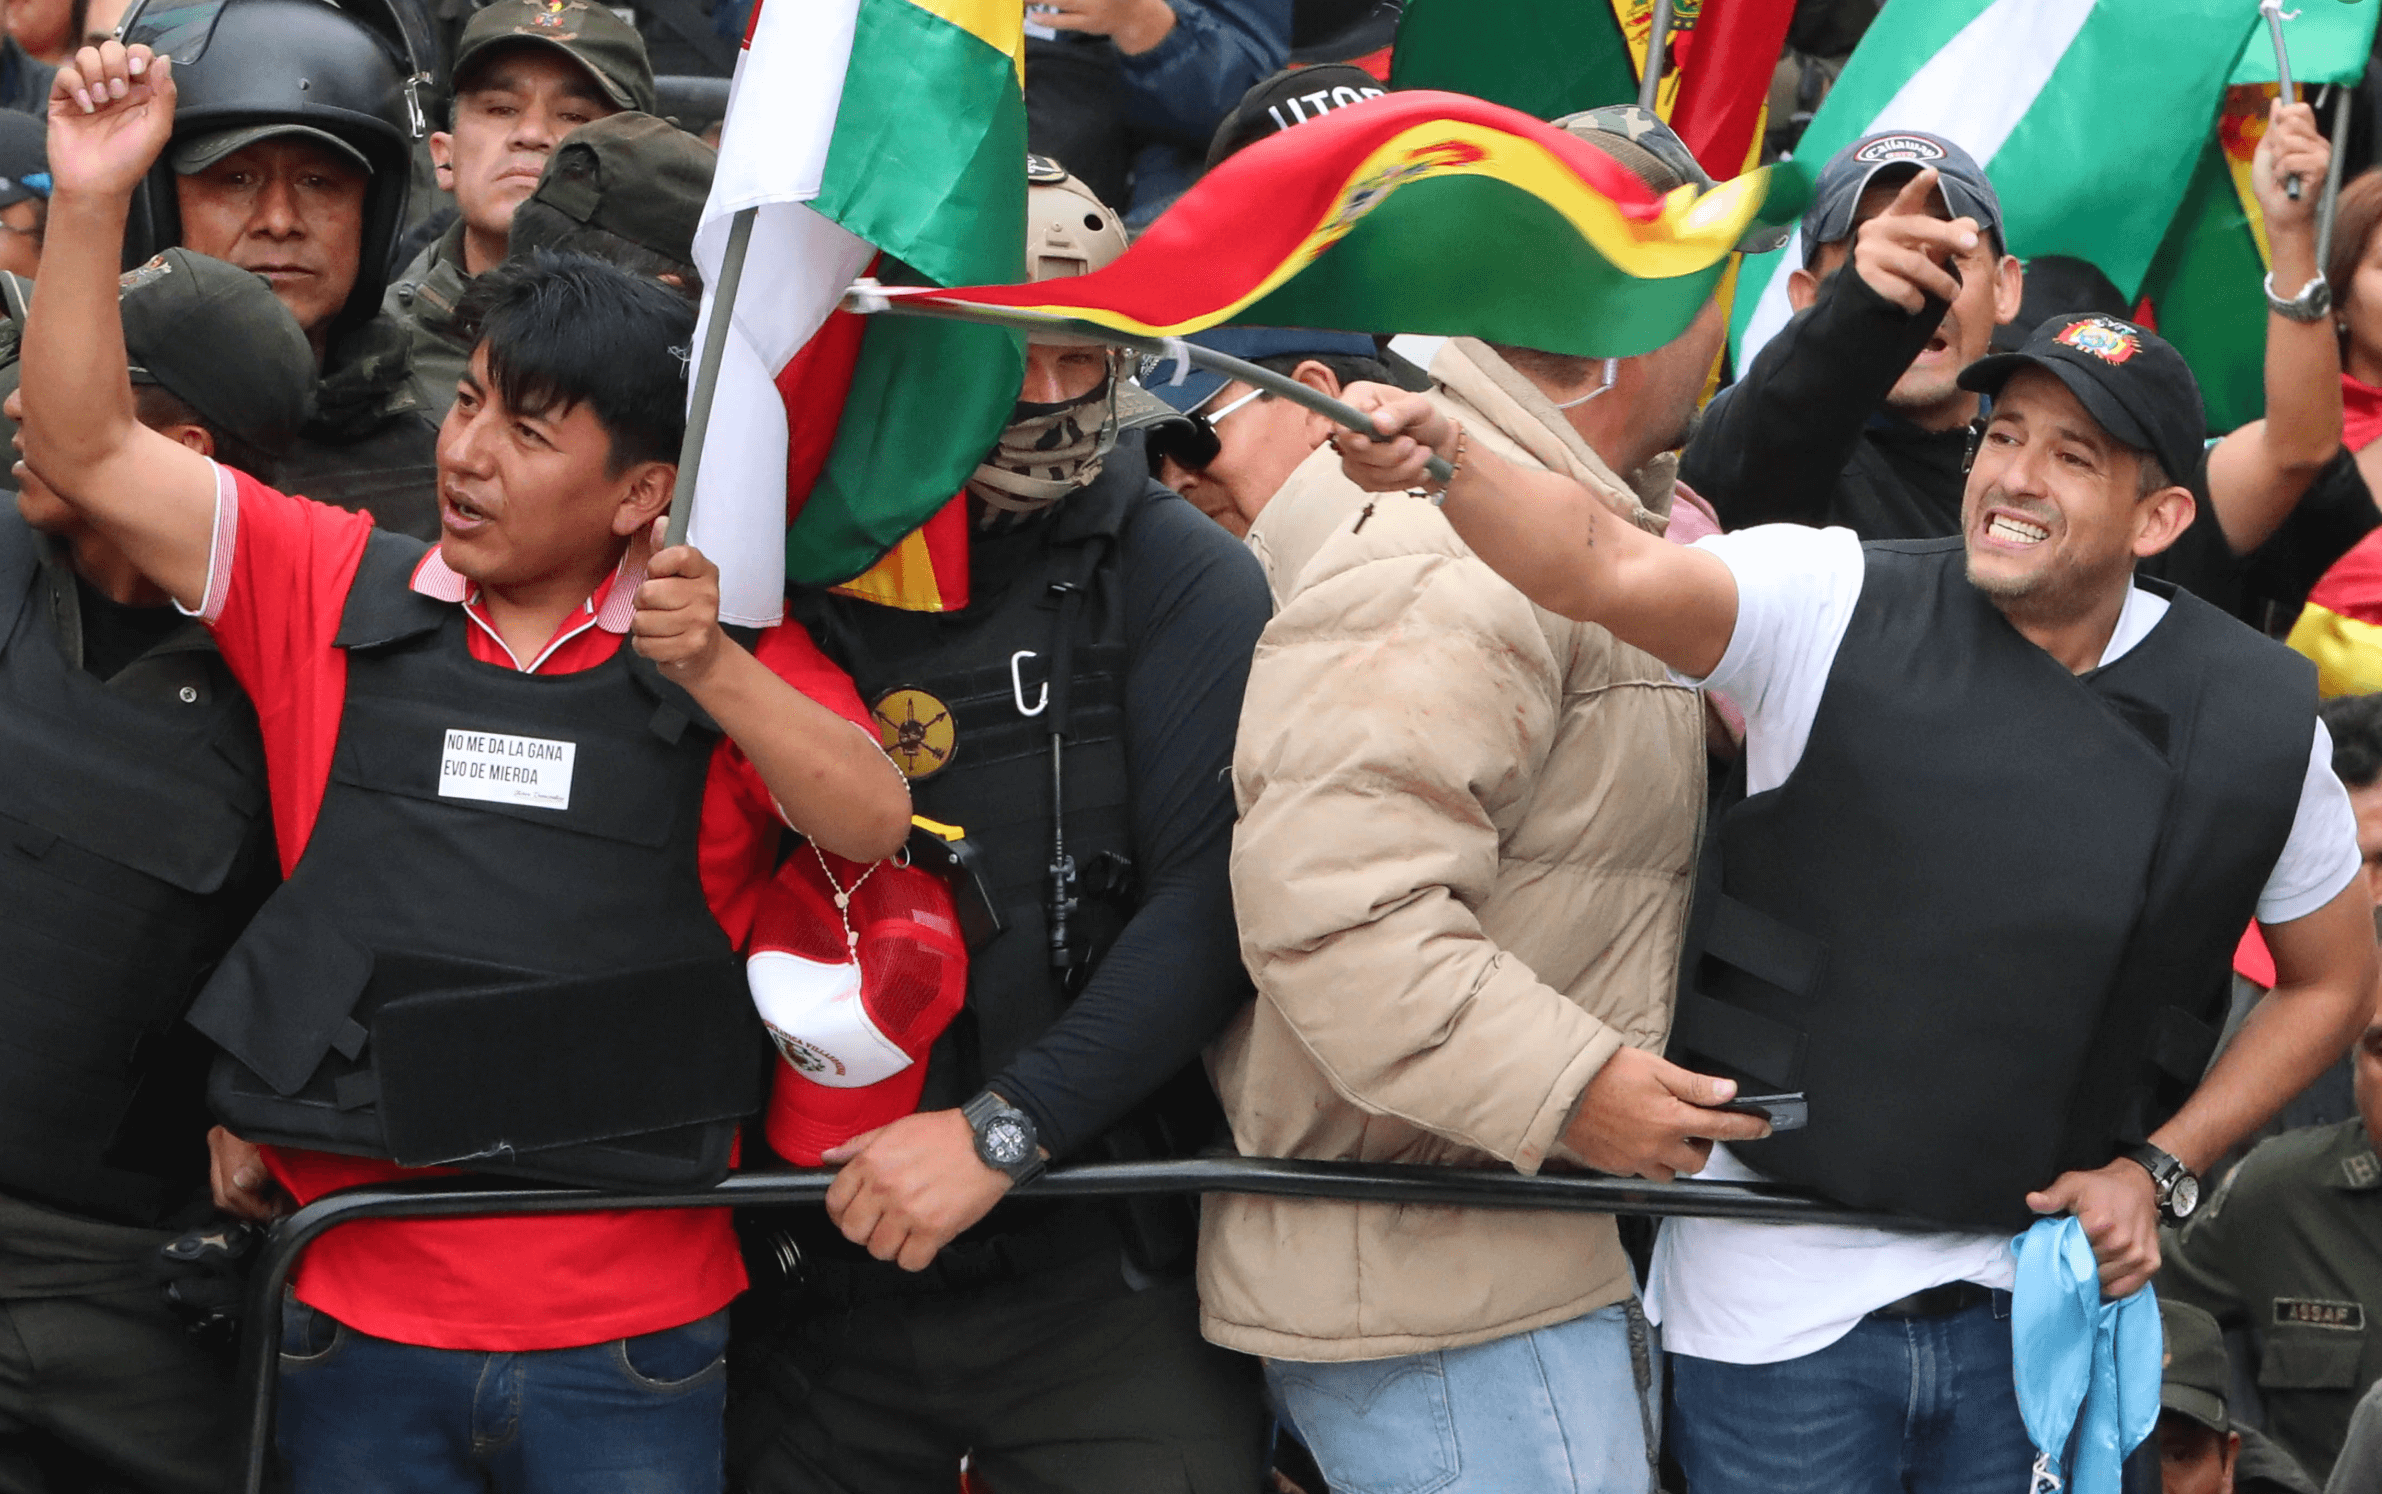 Bolivia’s authoritarian leader resigns after widespread protests triggered by election fraud